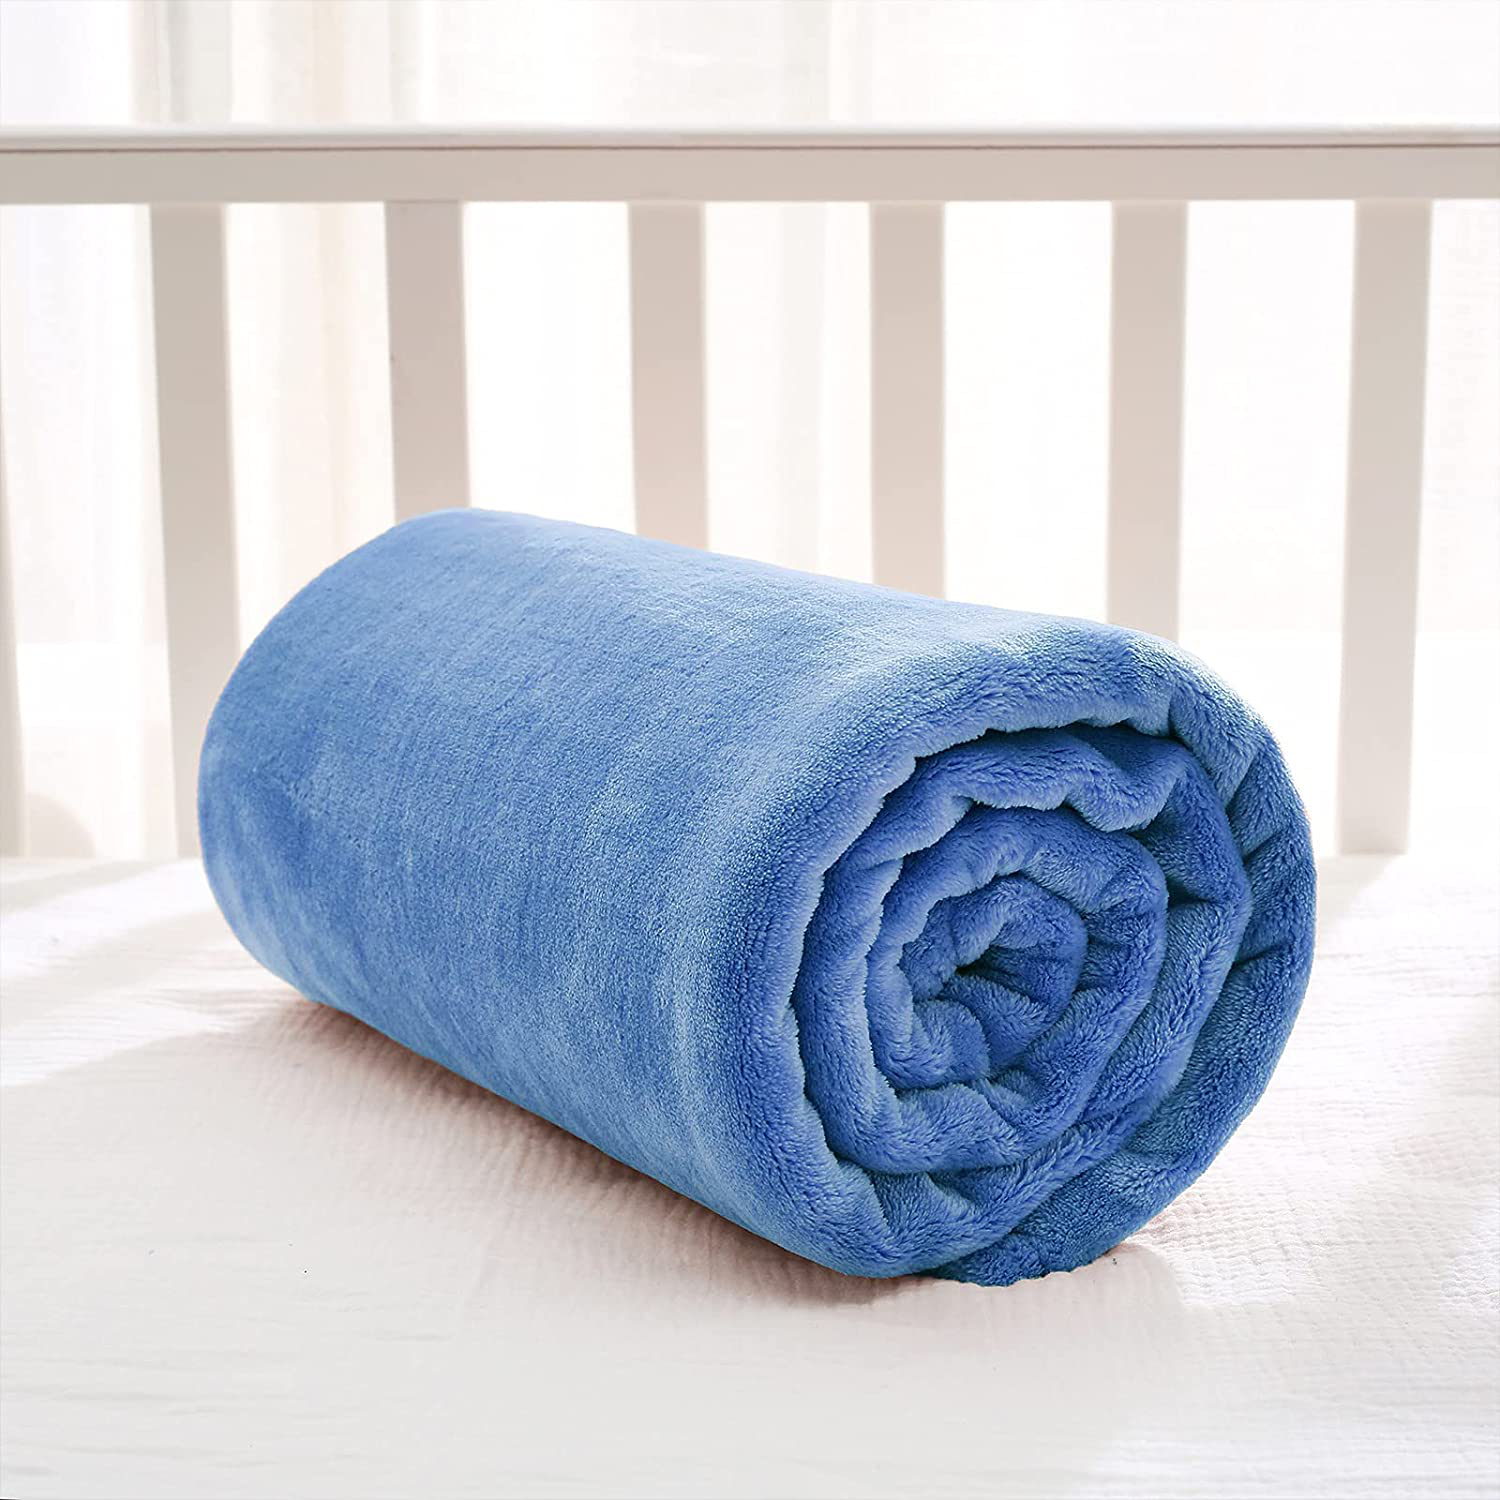 Exclusivo Mezcla Soft Fleece Baby Blanket Baby Swaddle Blanket Boys, Girls, Infant, Newborn Receiving Blankets Toddler and Kids Blankets for Crib Stroller (30x40 inches, Blue)